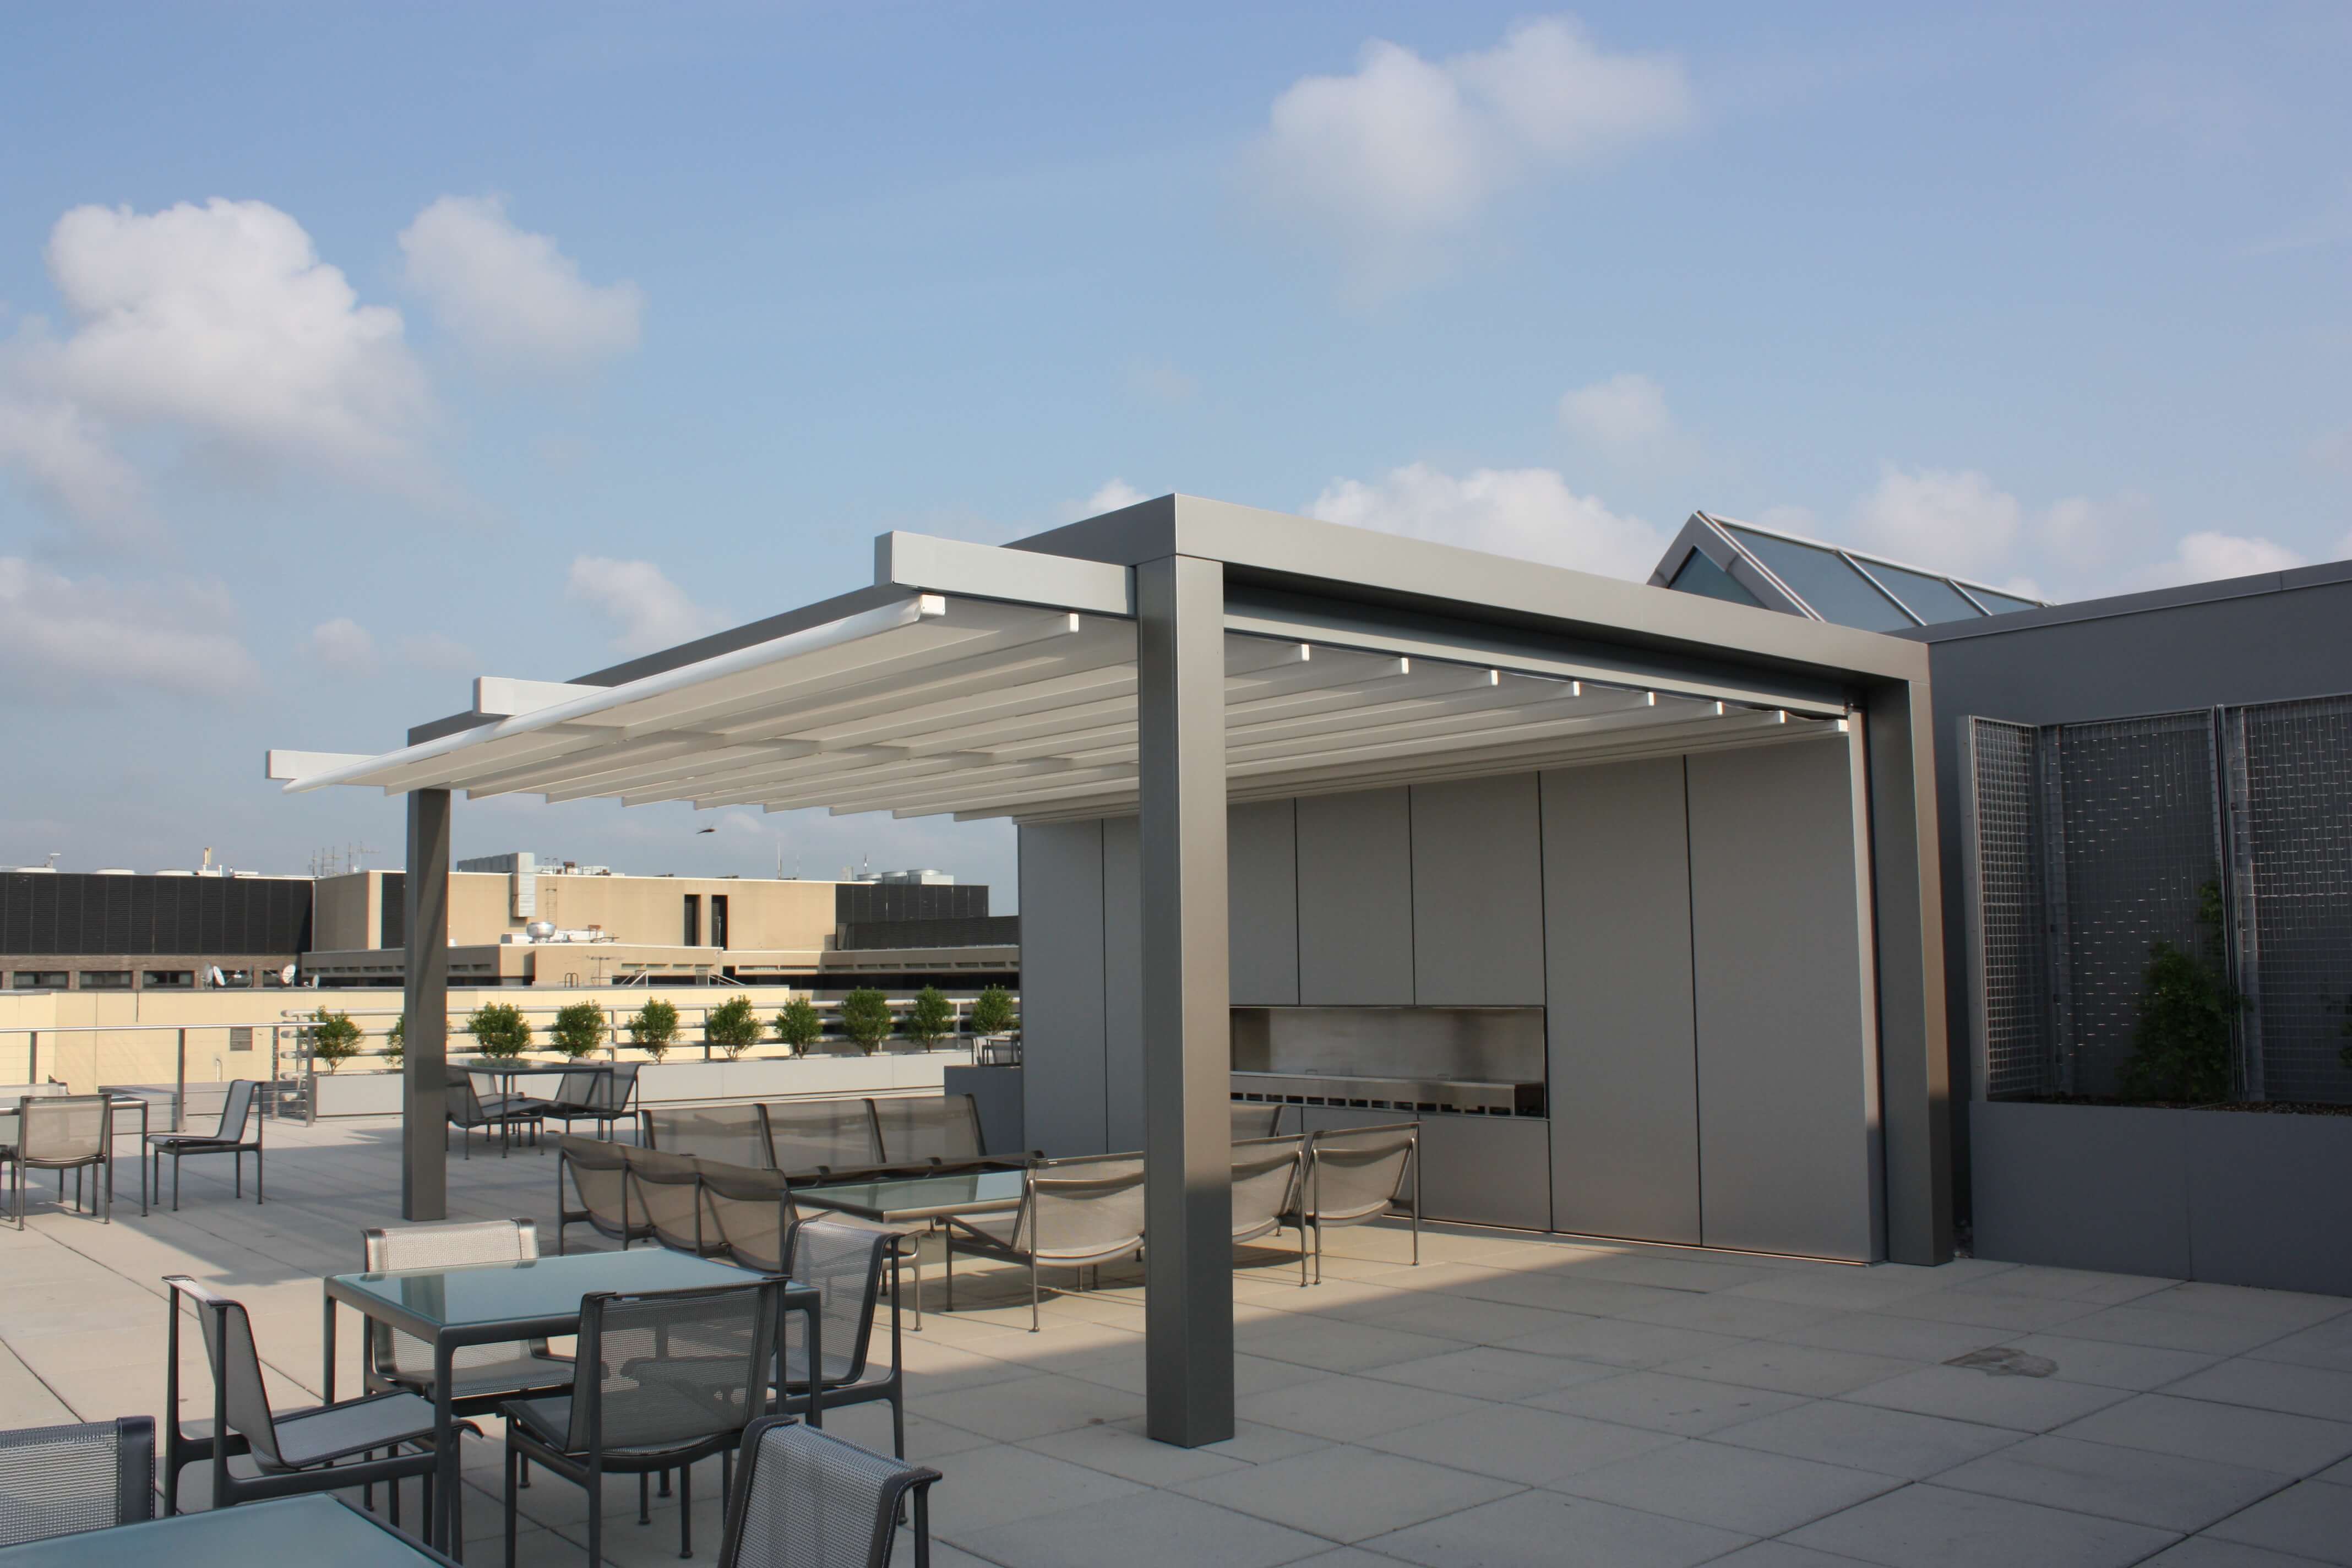 Rimini commercial grade patio deck cover pergola system by retractable awnings